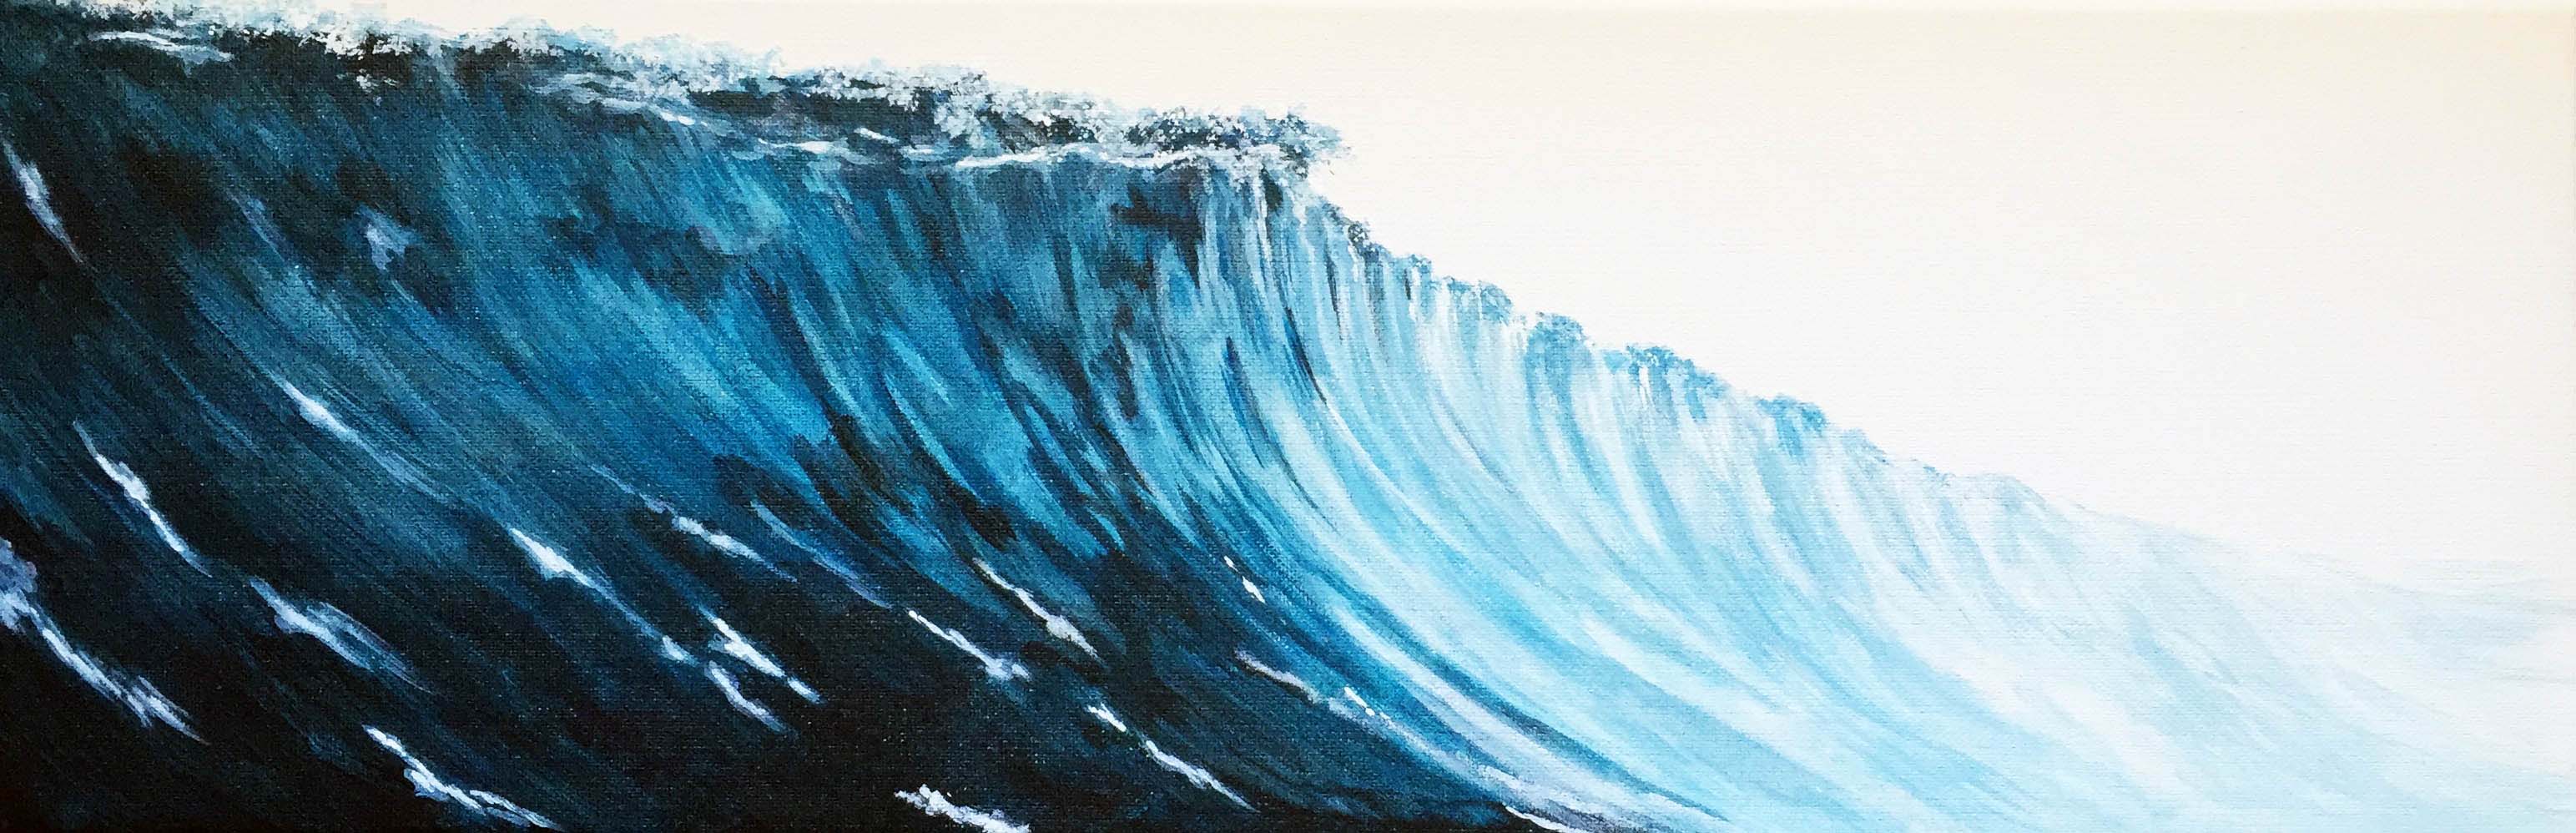 acrylic painting of a wave